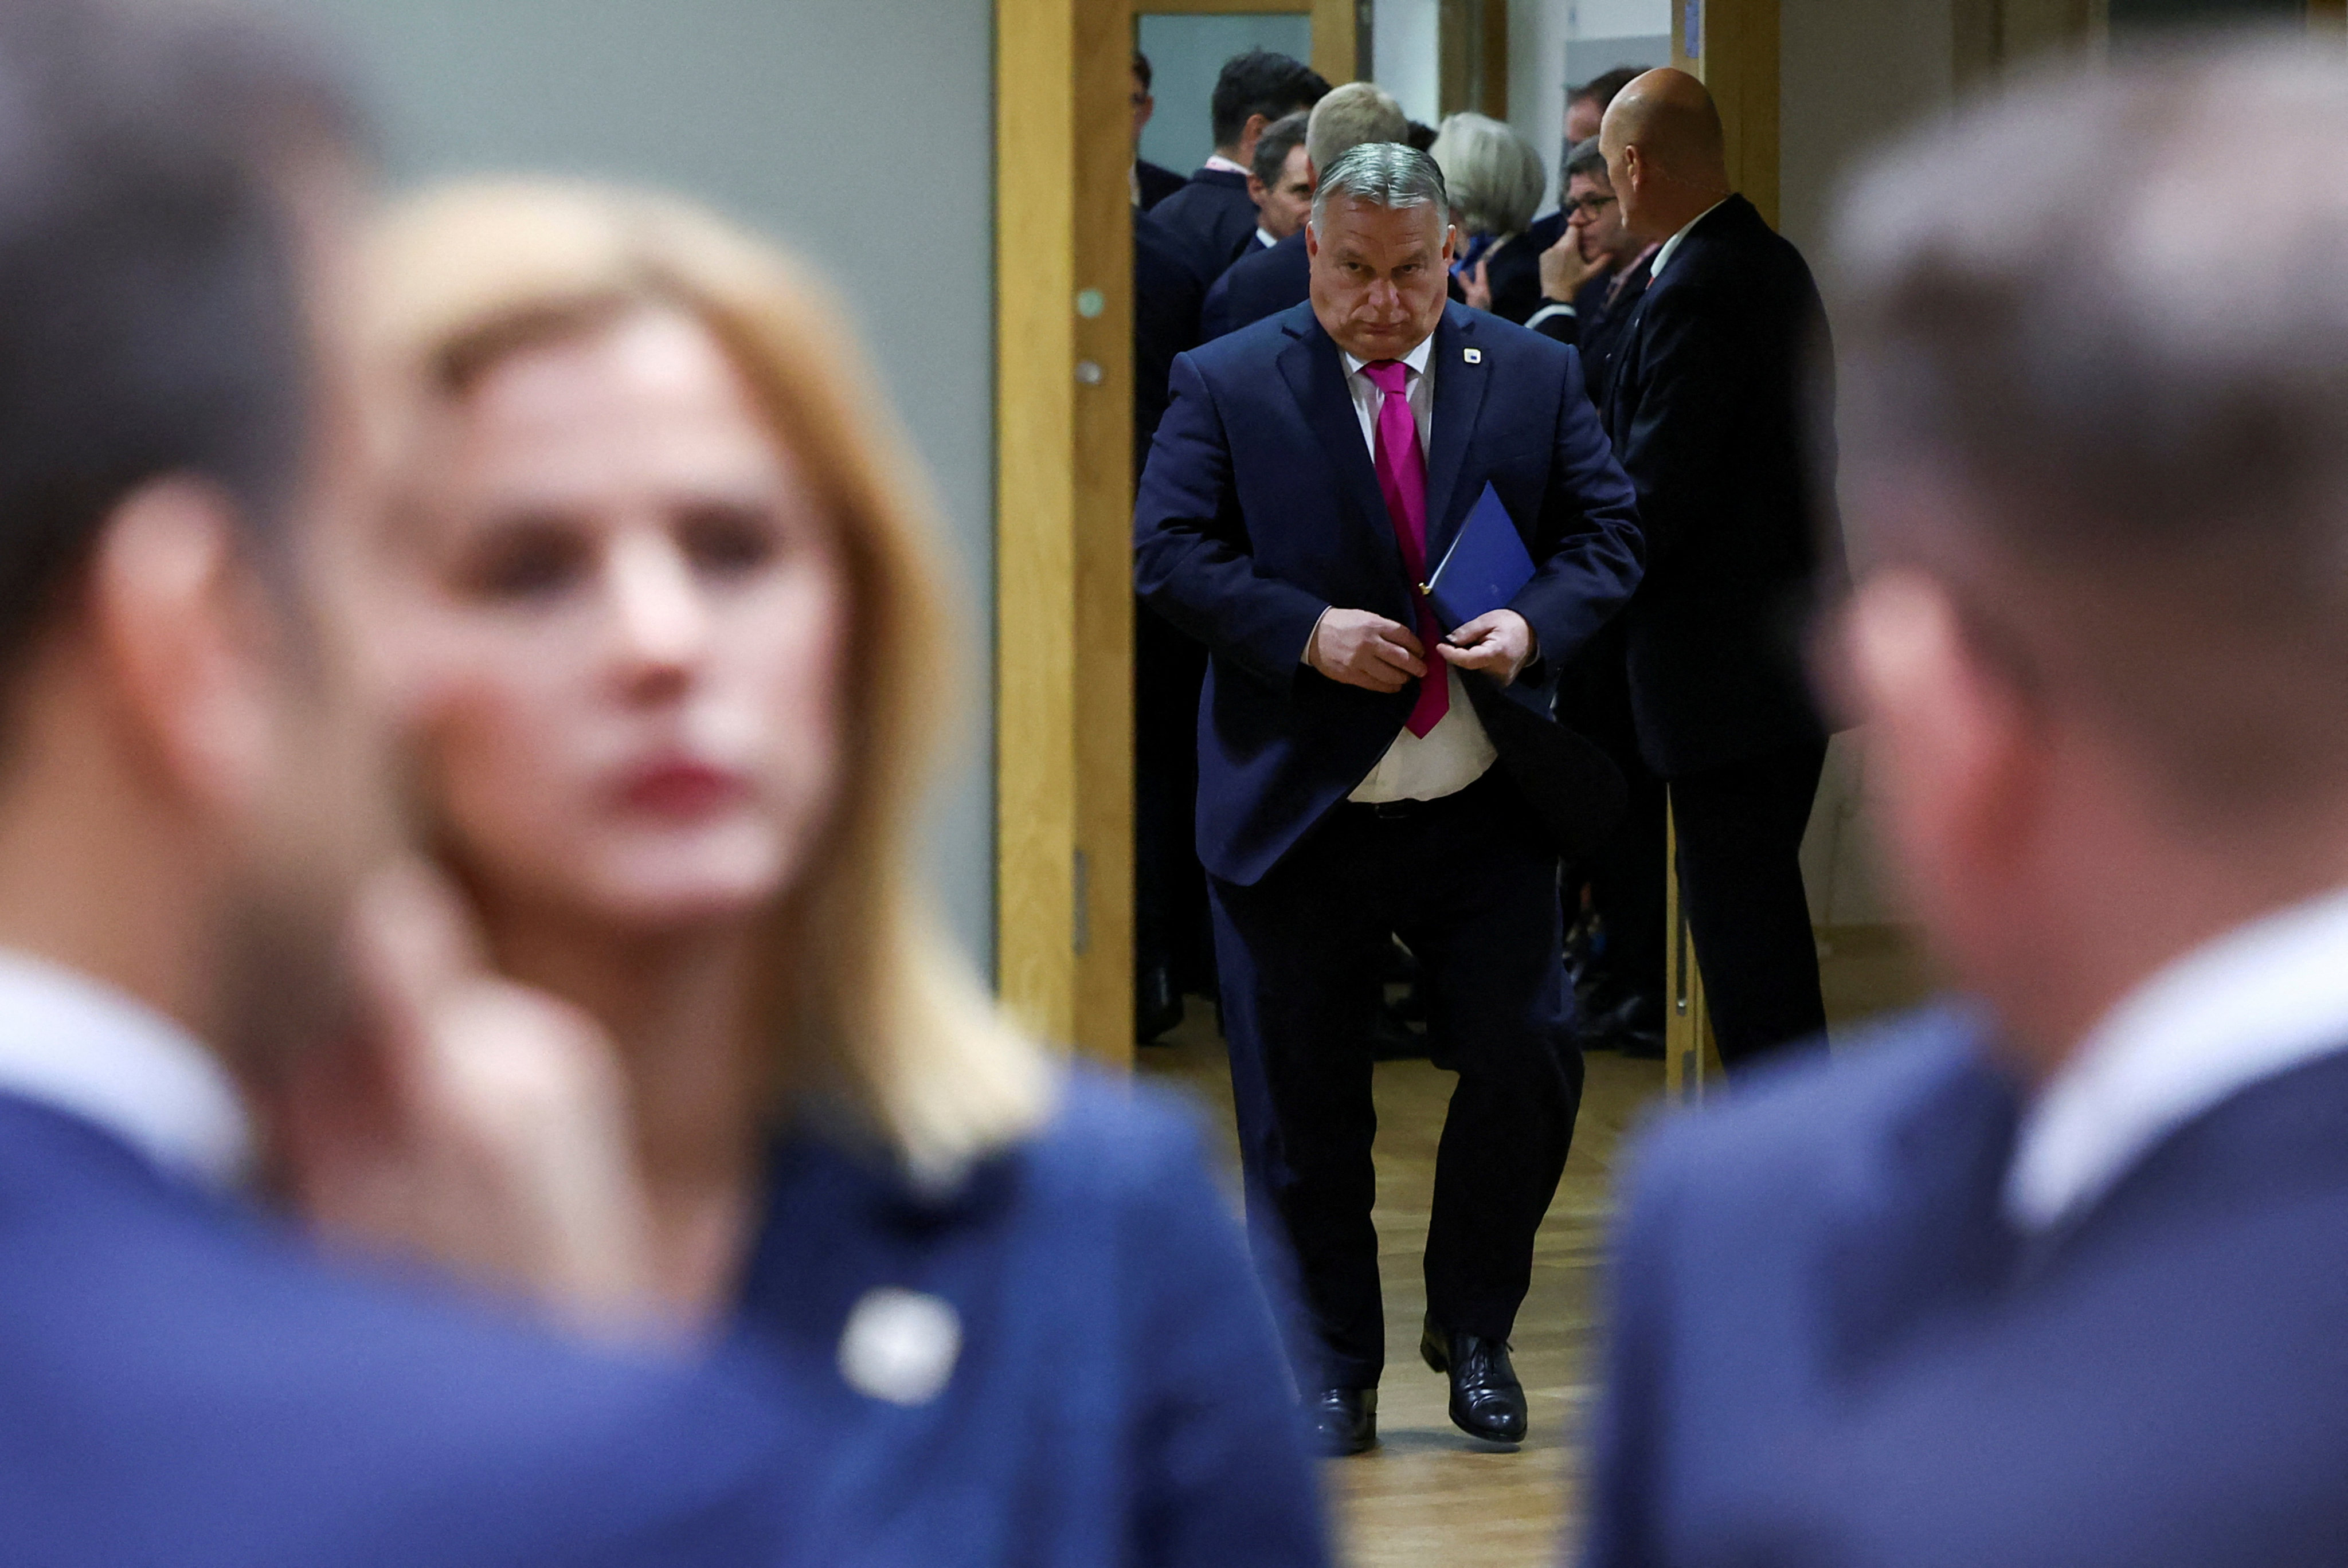 Hungary’s Prime Minister Viktor Orban walks as he attends an EU leaders summit, in Brussels. Orban has a history of banking on clashes with other EU leaders for electoral benefit at home. Photo: Reuters